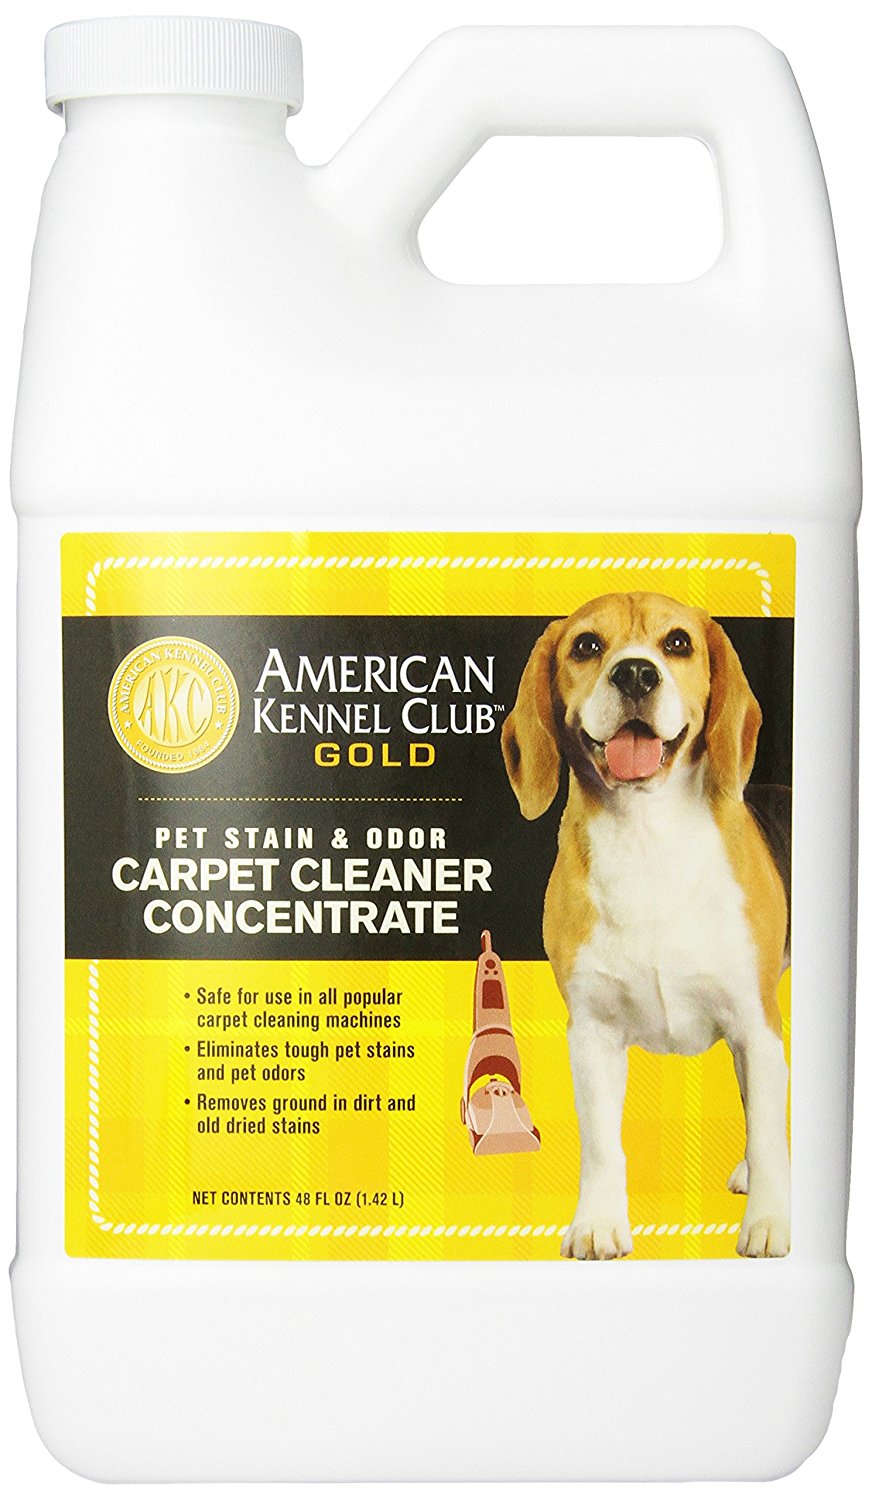 AMERICAN KENNEL CLUB GOLD 2X Carpet and Upholstery Concentrate Cleaning